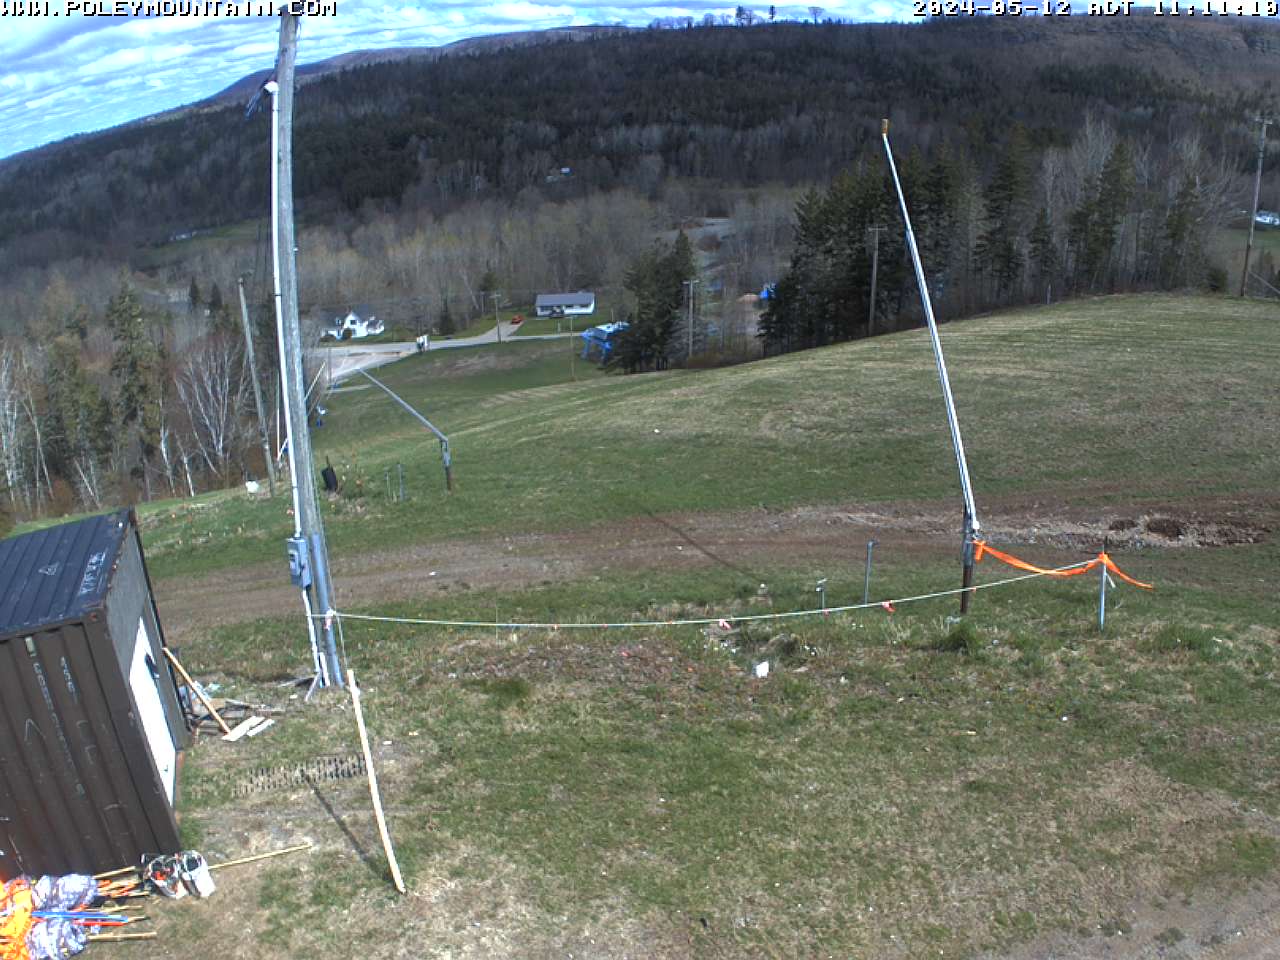 Web Cam image of Sussex (Poley Mountain)